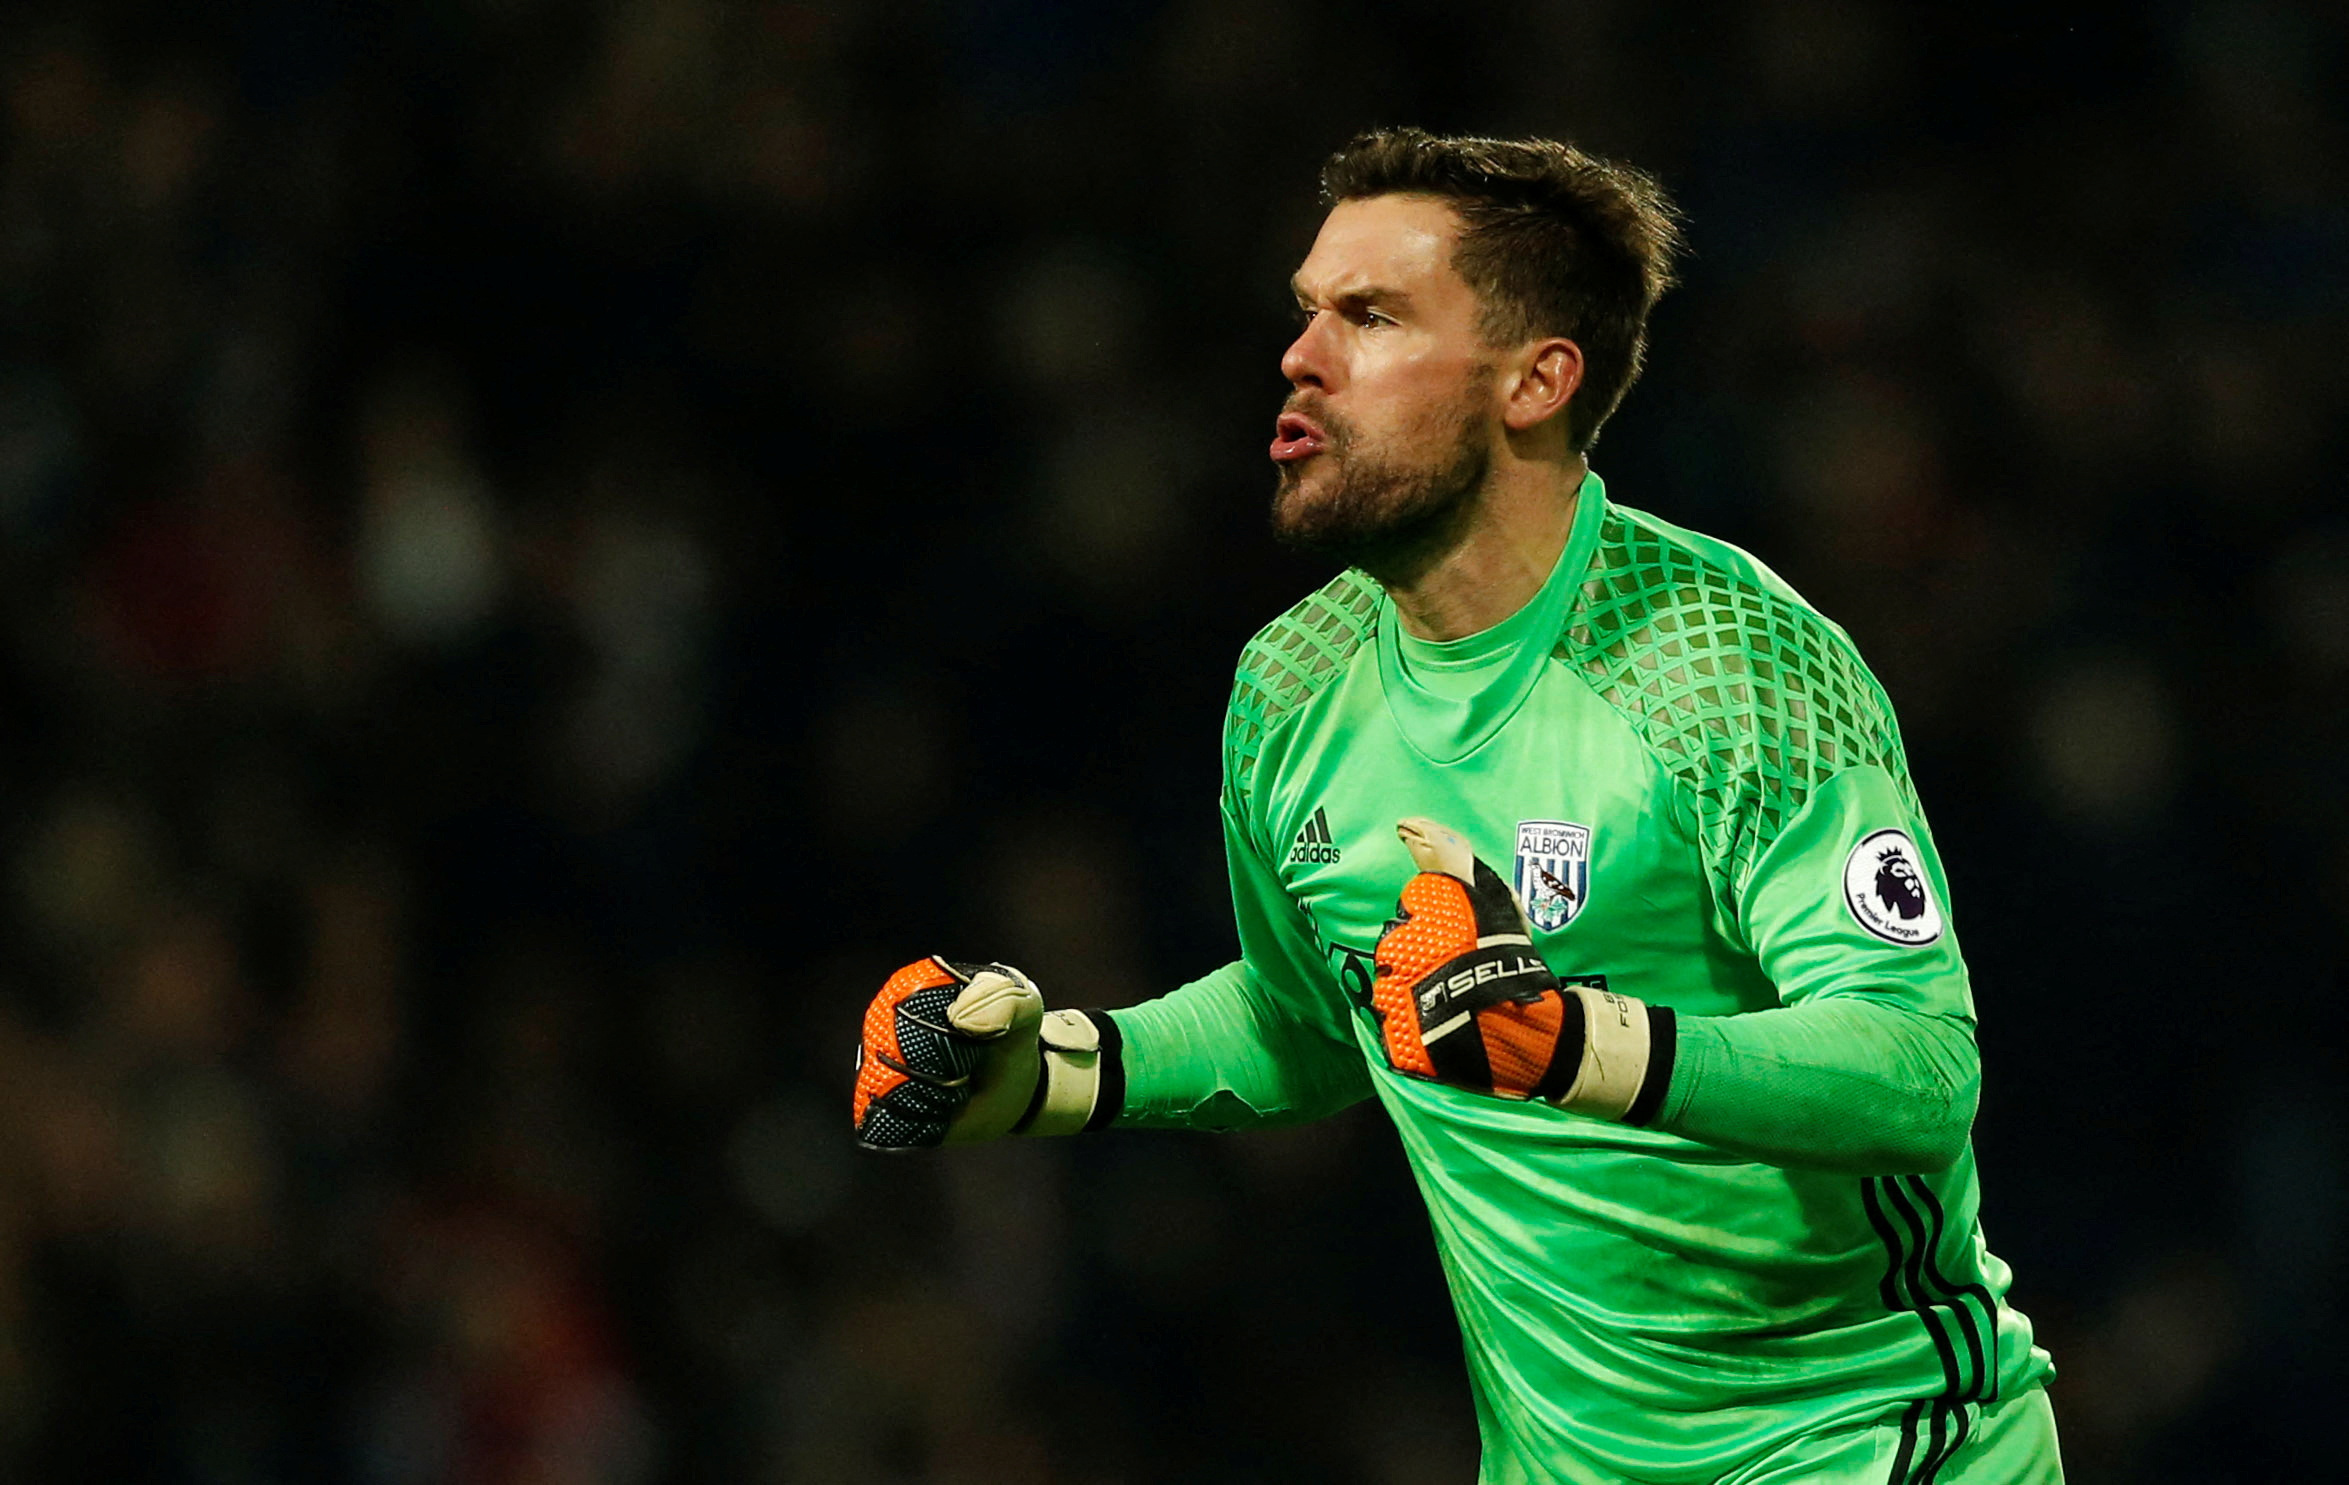 West Bromwich Albion's Ben Foster celebrates their first goal